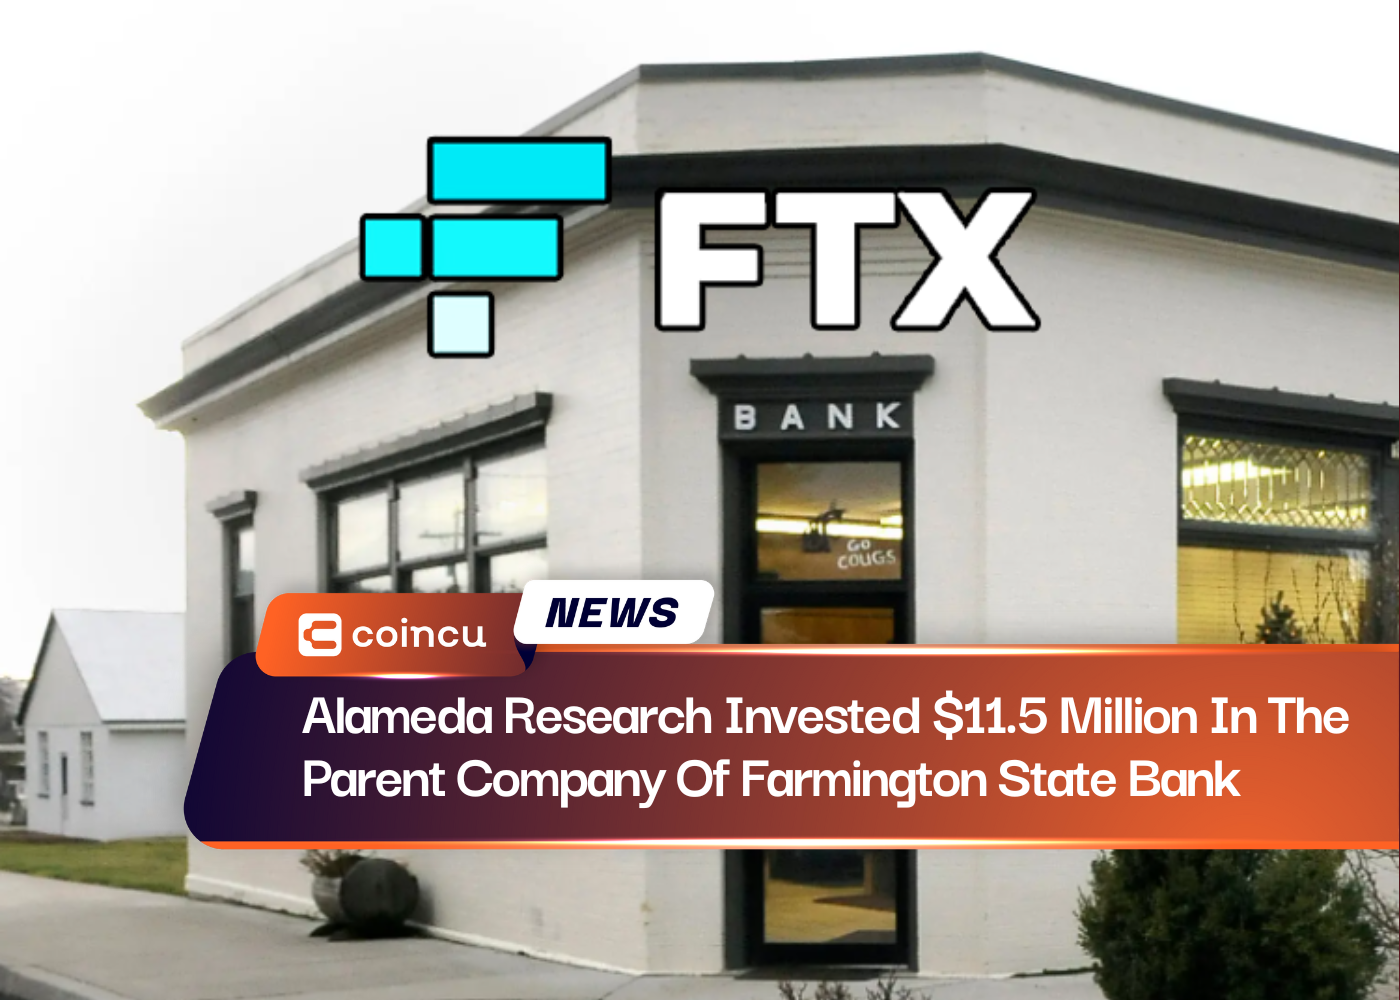 Alameda Research Invested $11.5 Million In The Parent Company Of Farmington State Bank